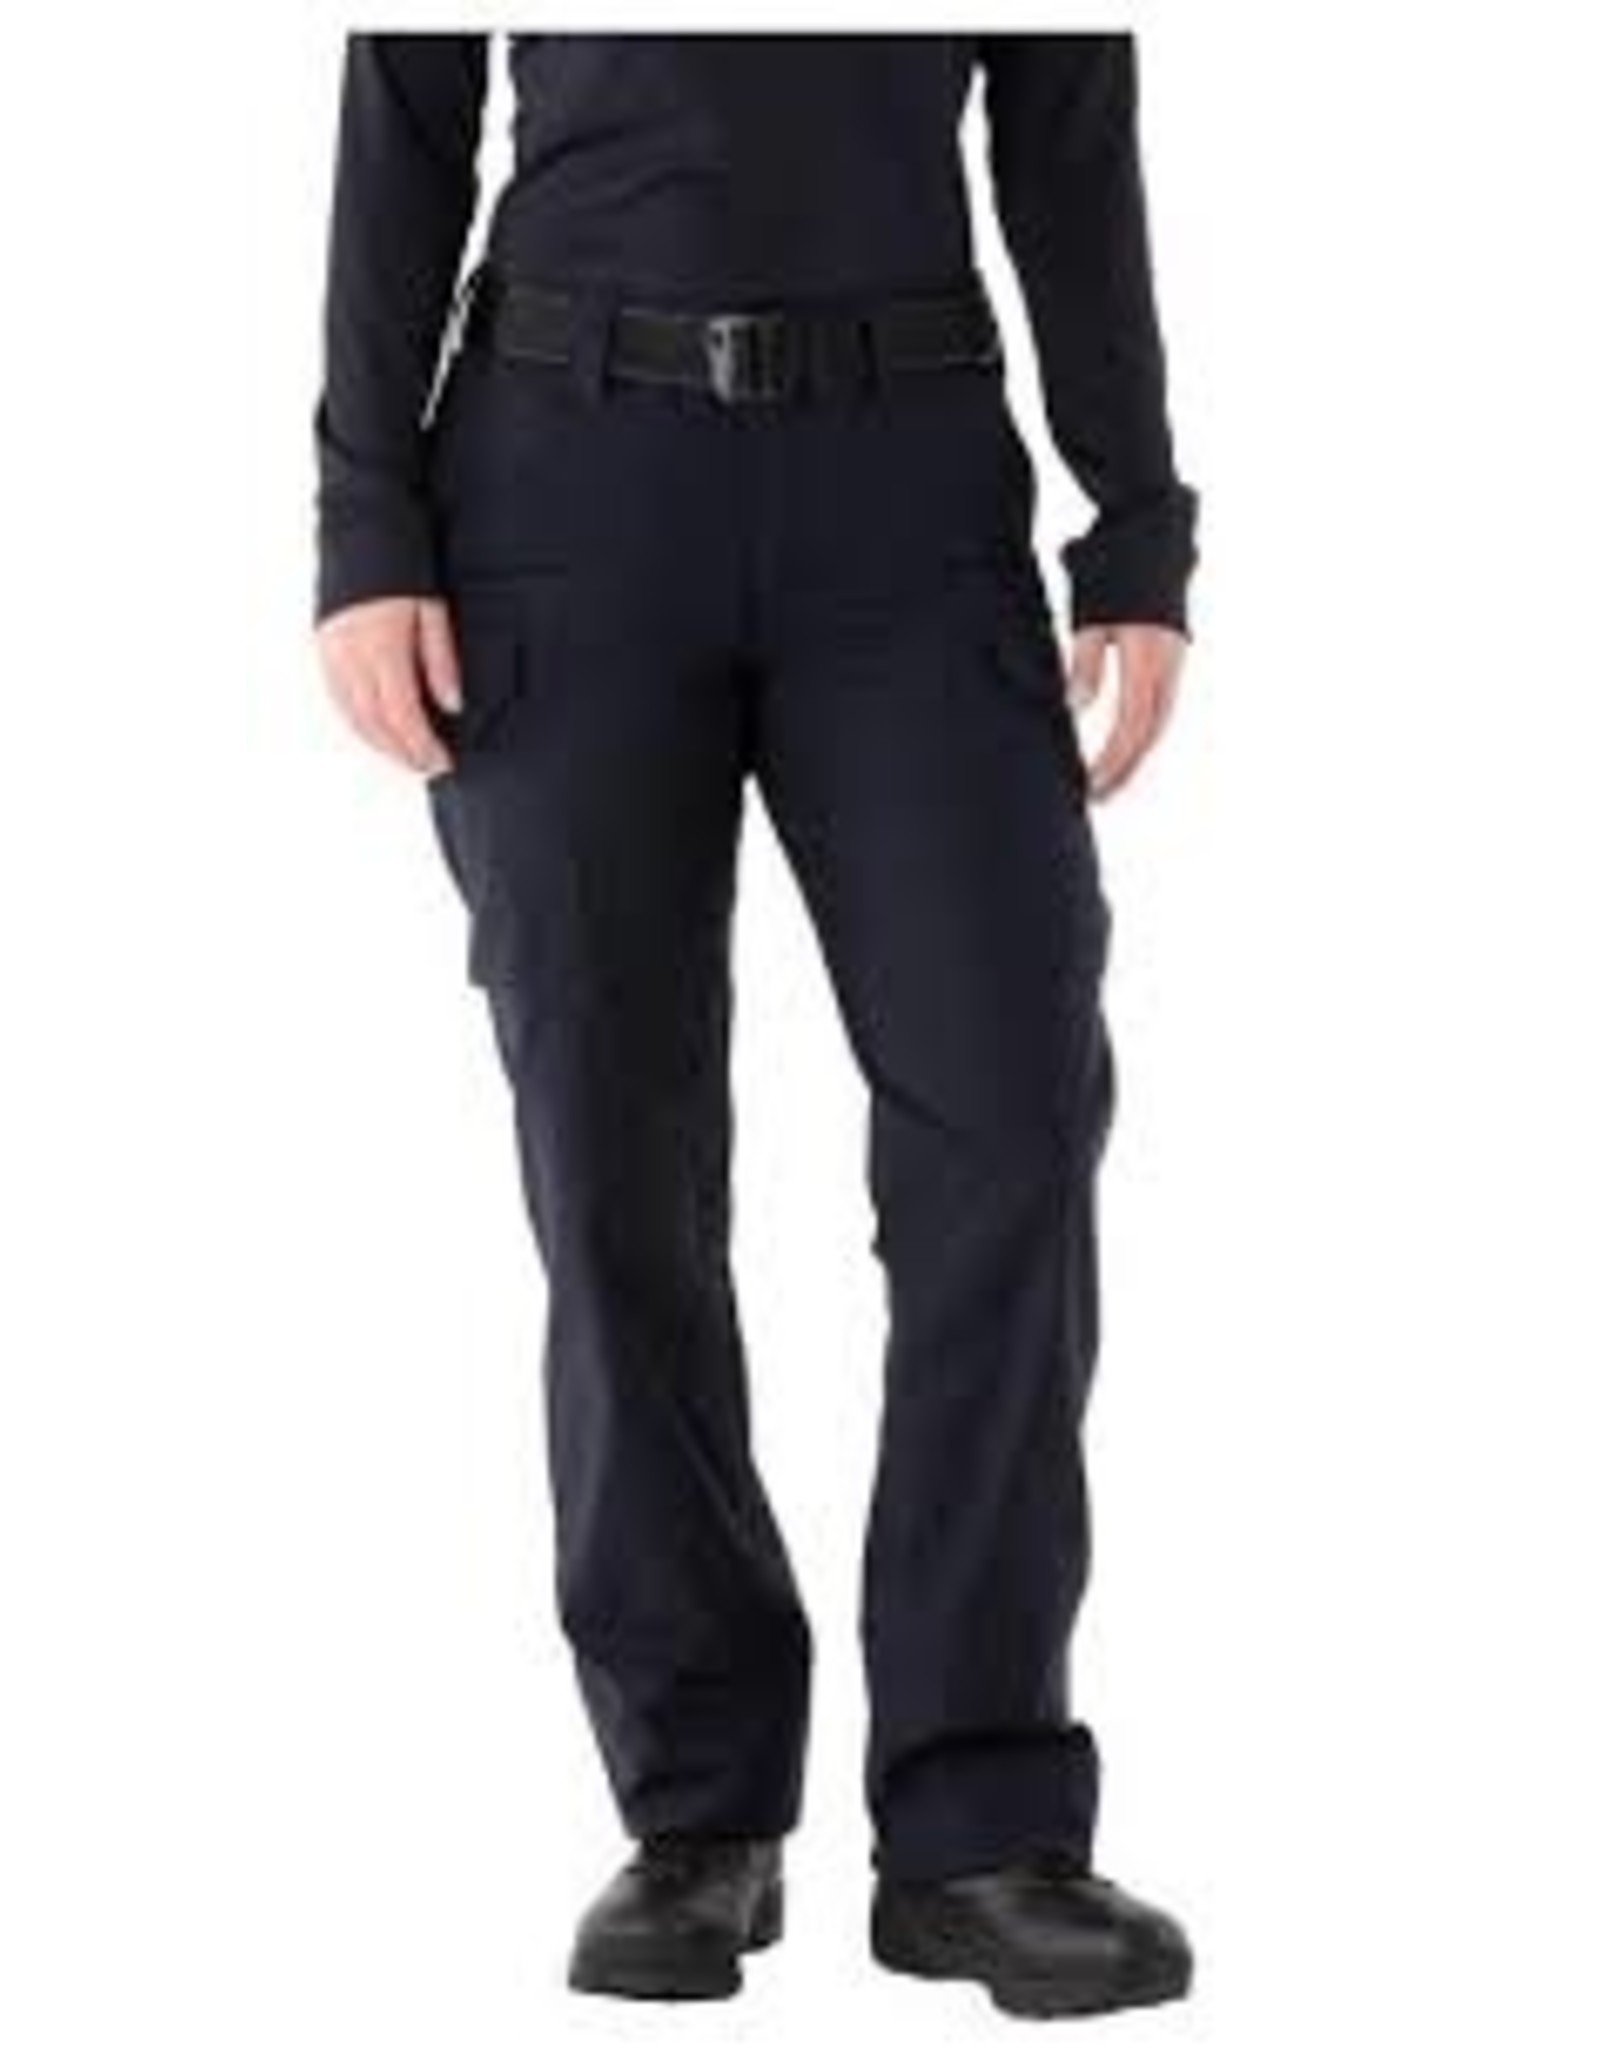 Tactical pants women: Stylish and Functional Apparel缩略图